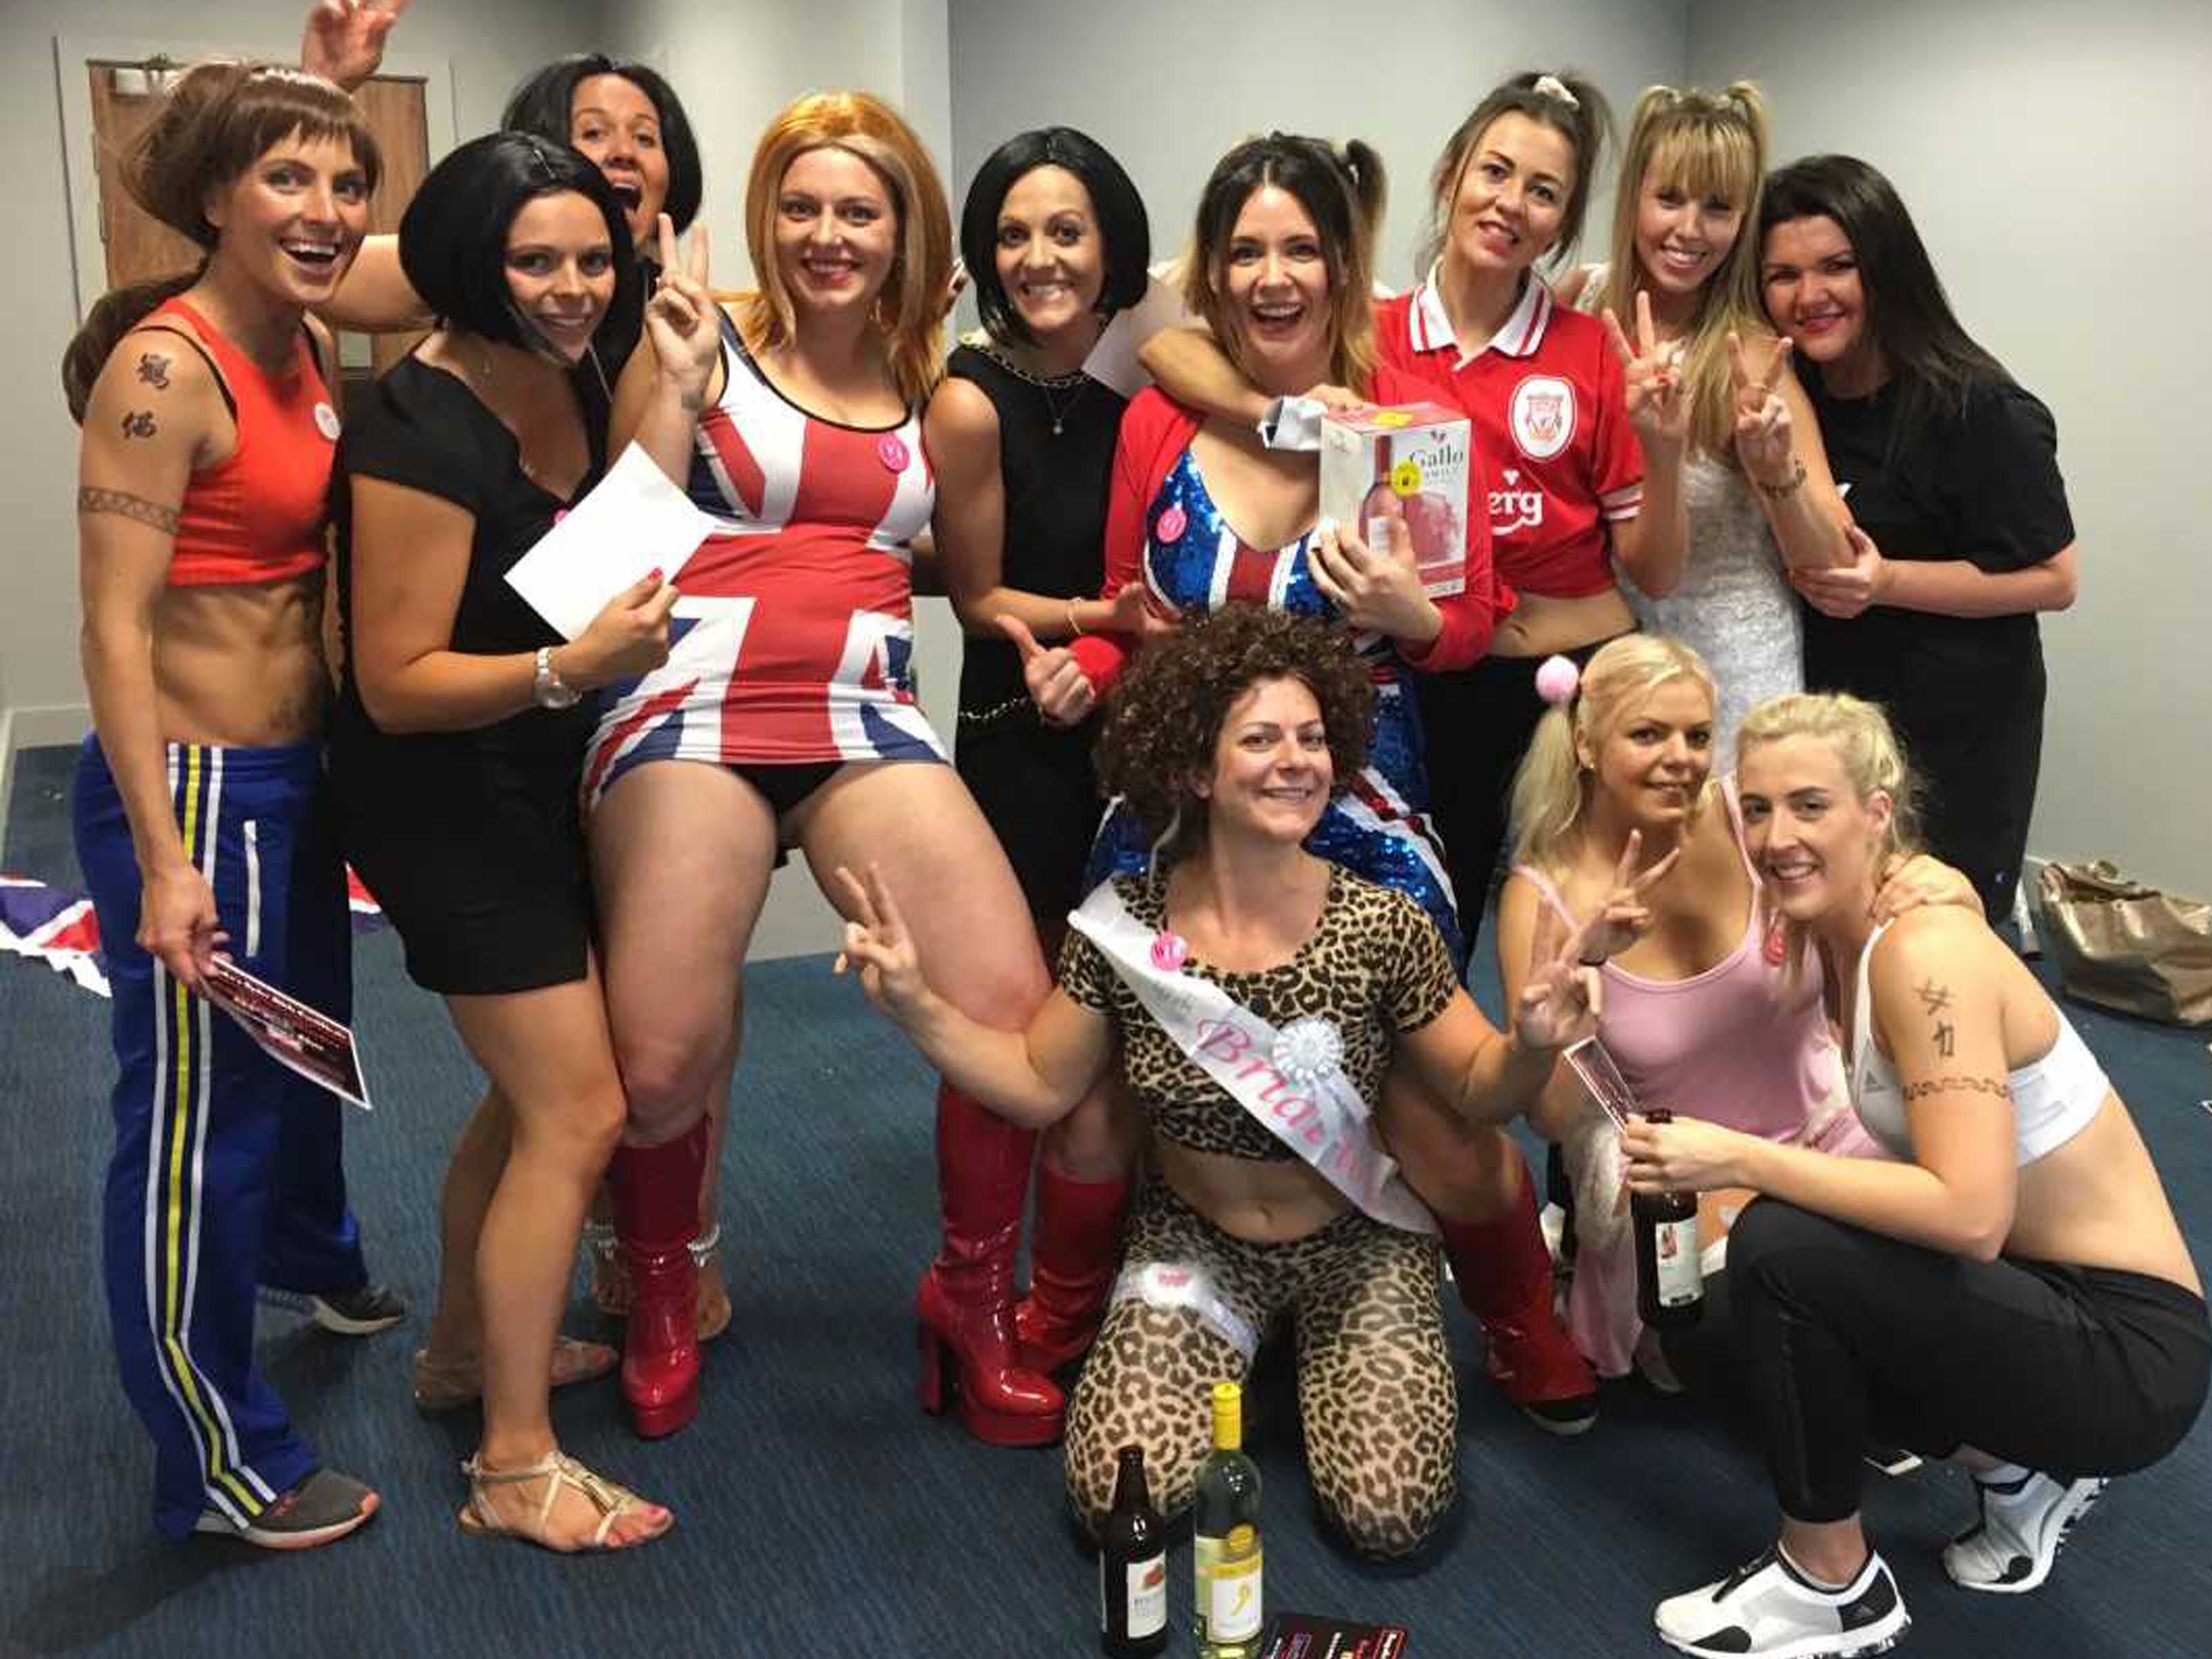 Spice Girls Themed Dance Hen Party Venue Included